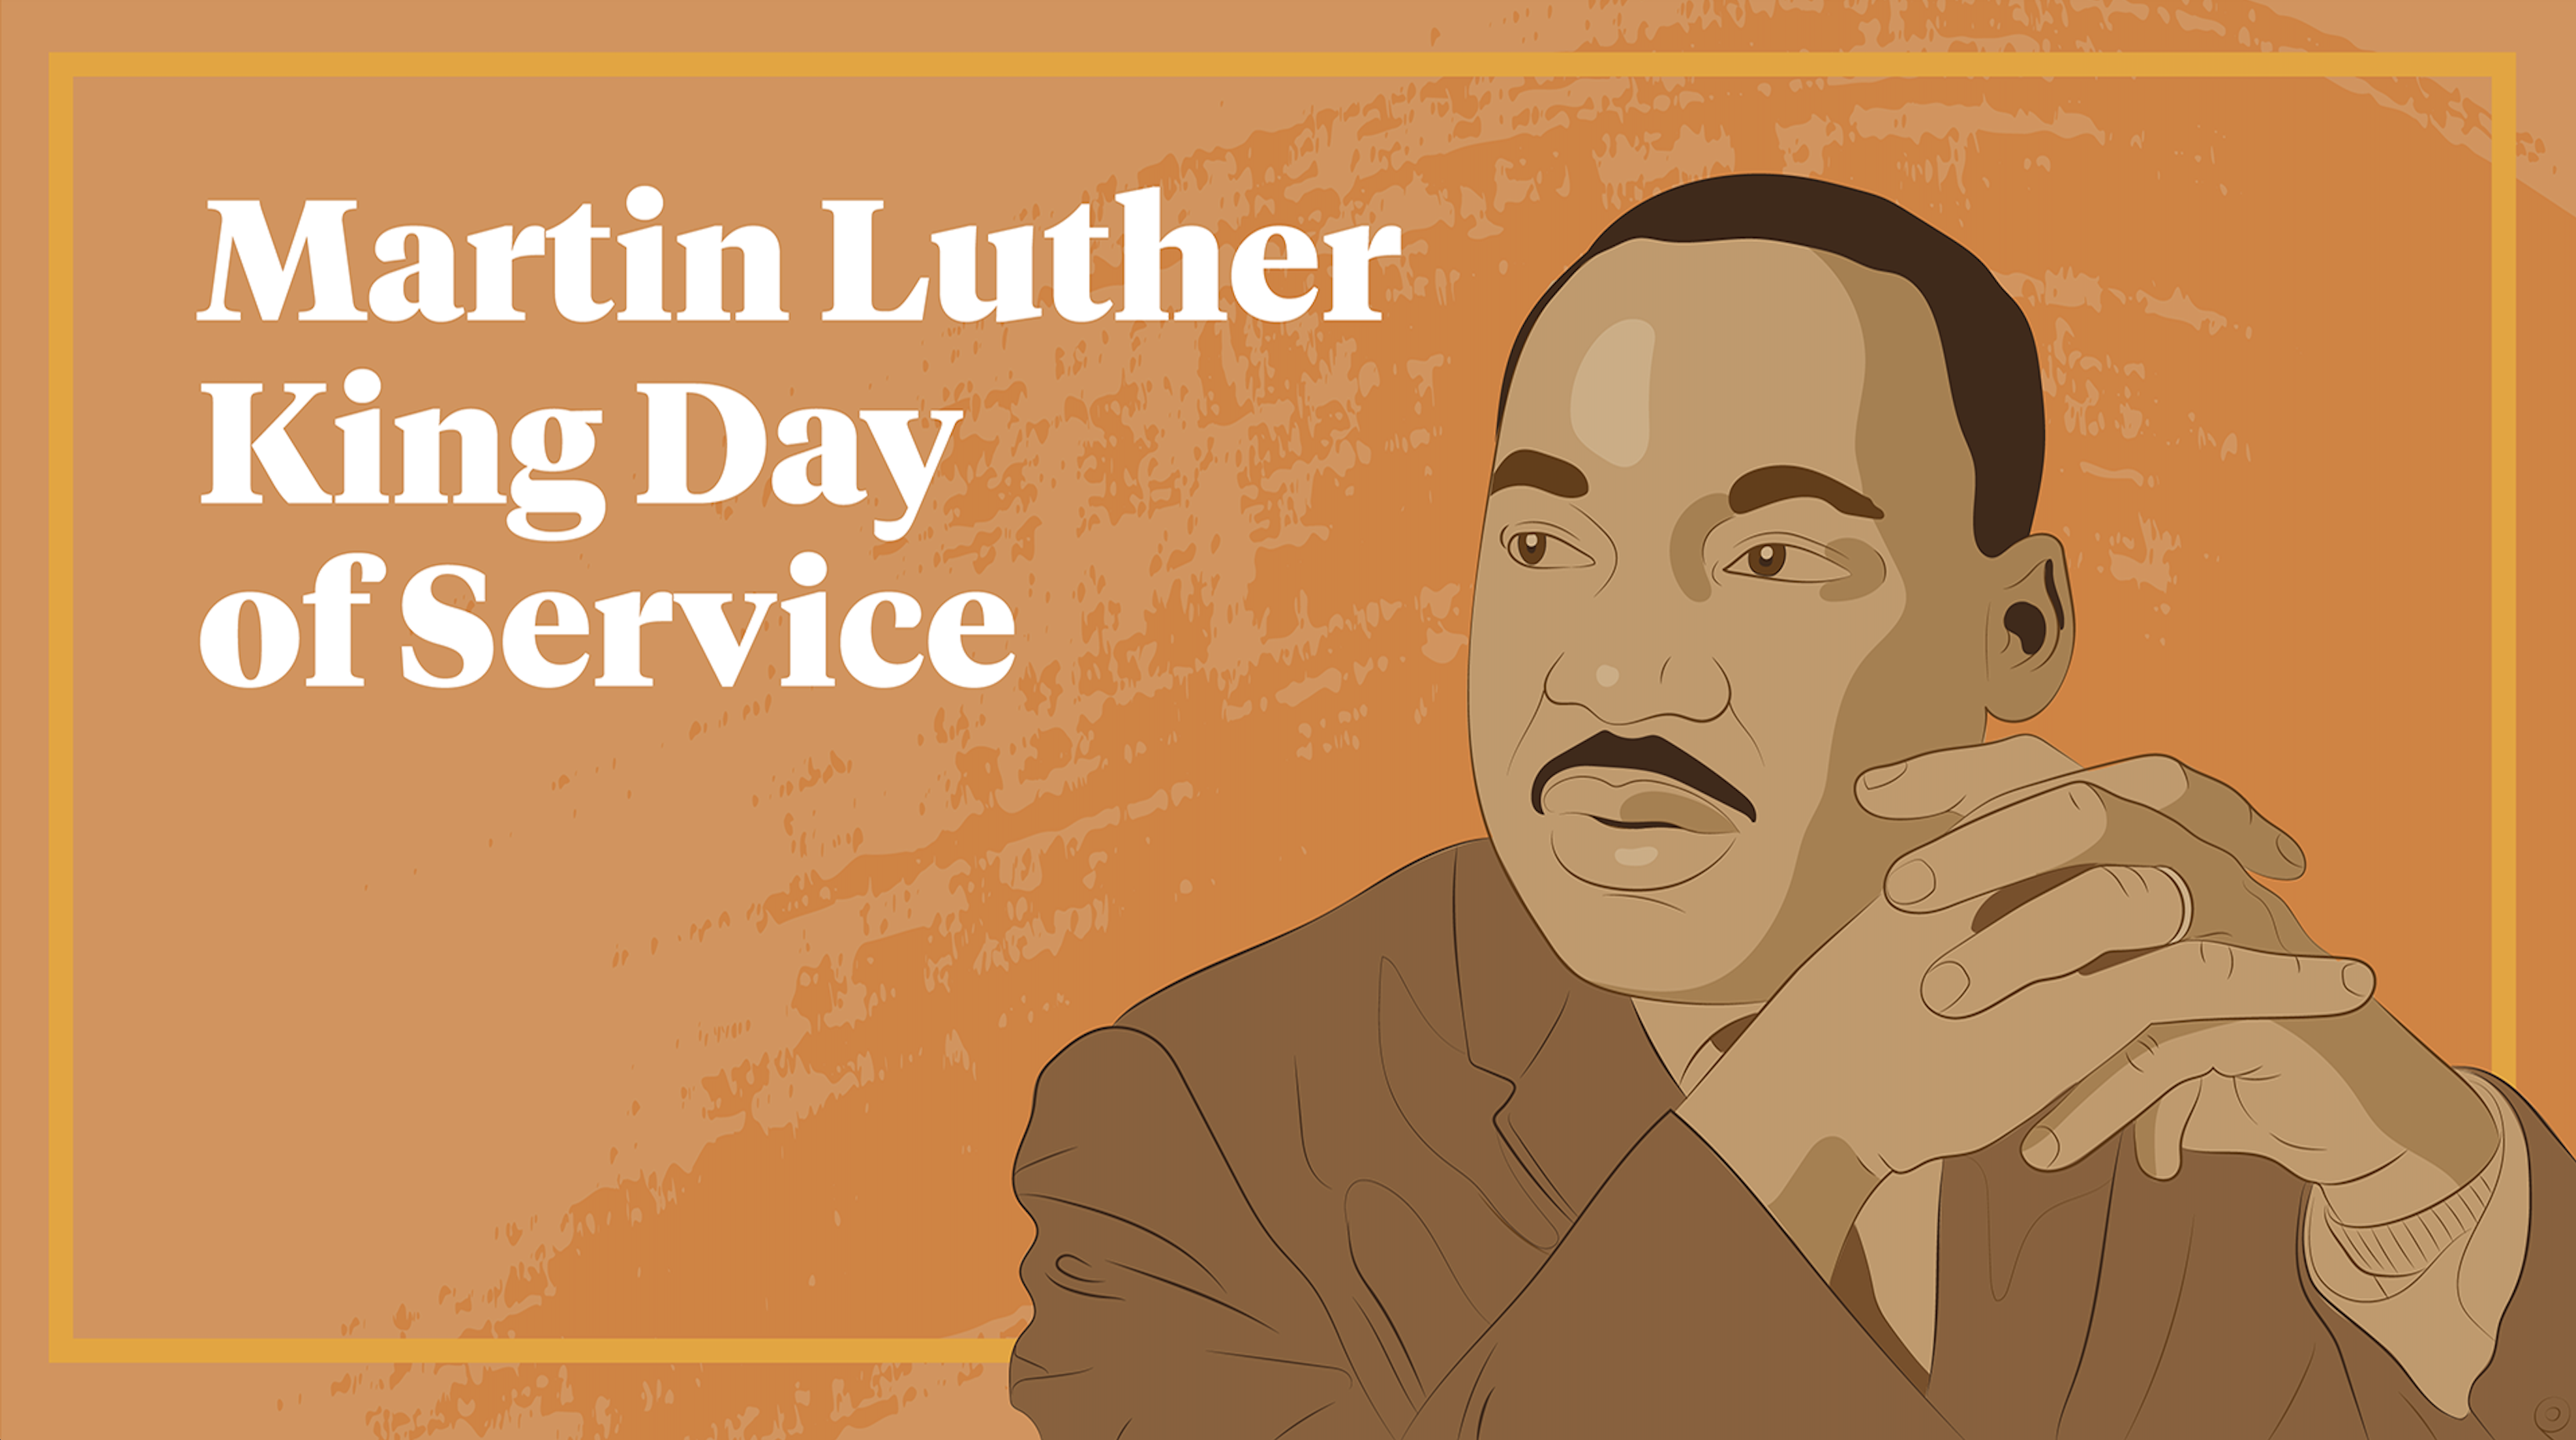 Make MLK Day of Service a Day On, Not a Day Off